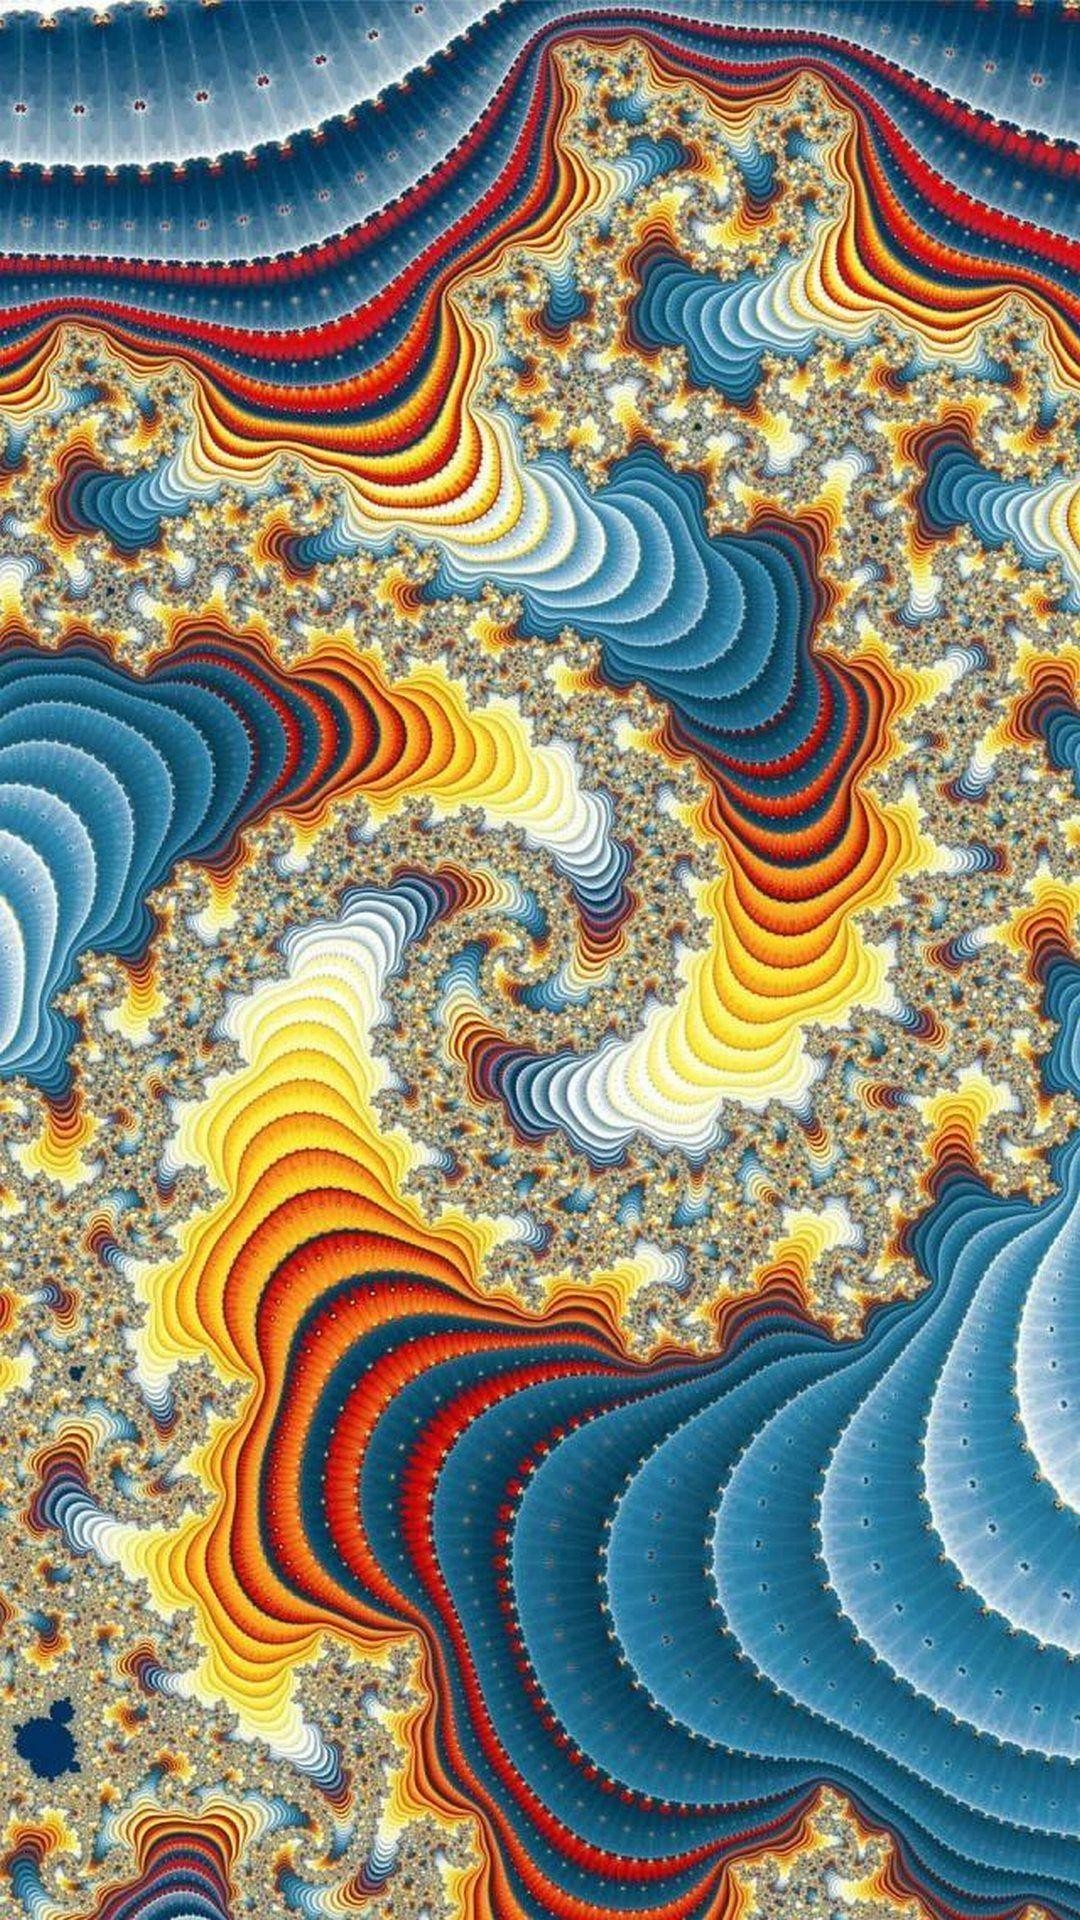 Trippy Wallpapers for Iphone 7, Iphone 7 plus, Iphone 6 plus